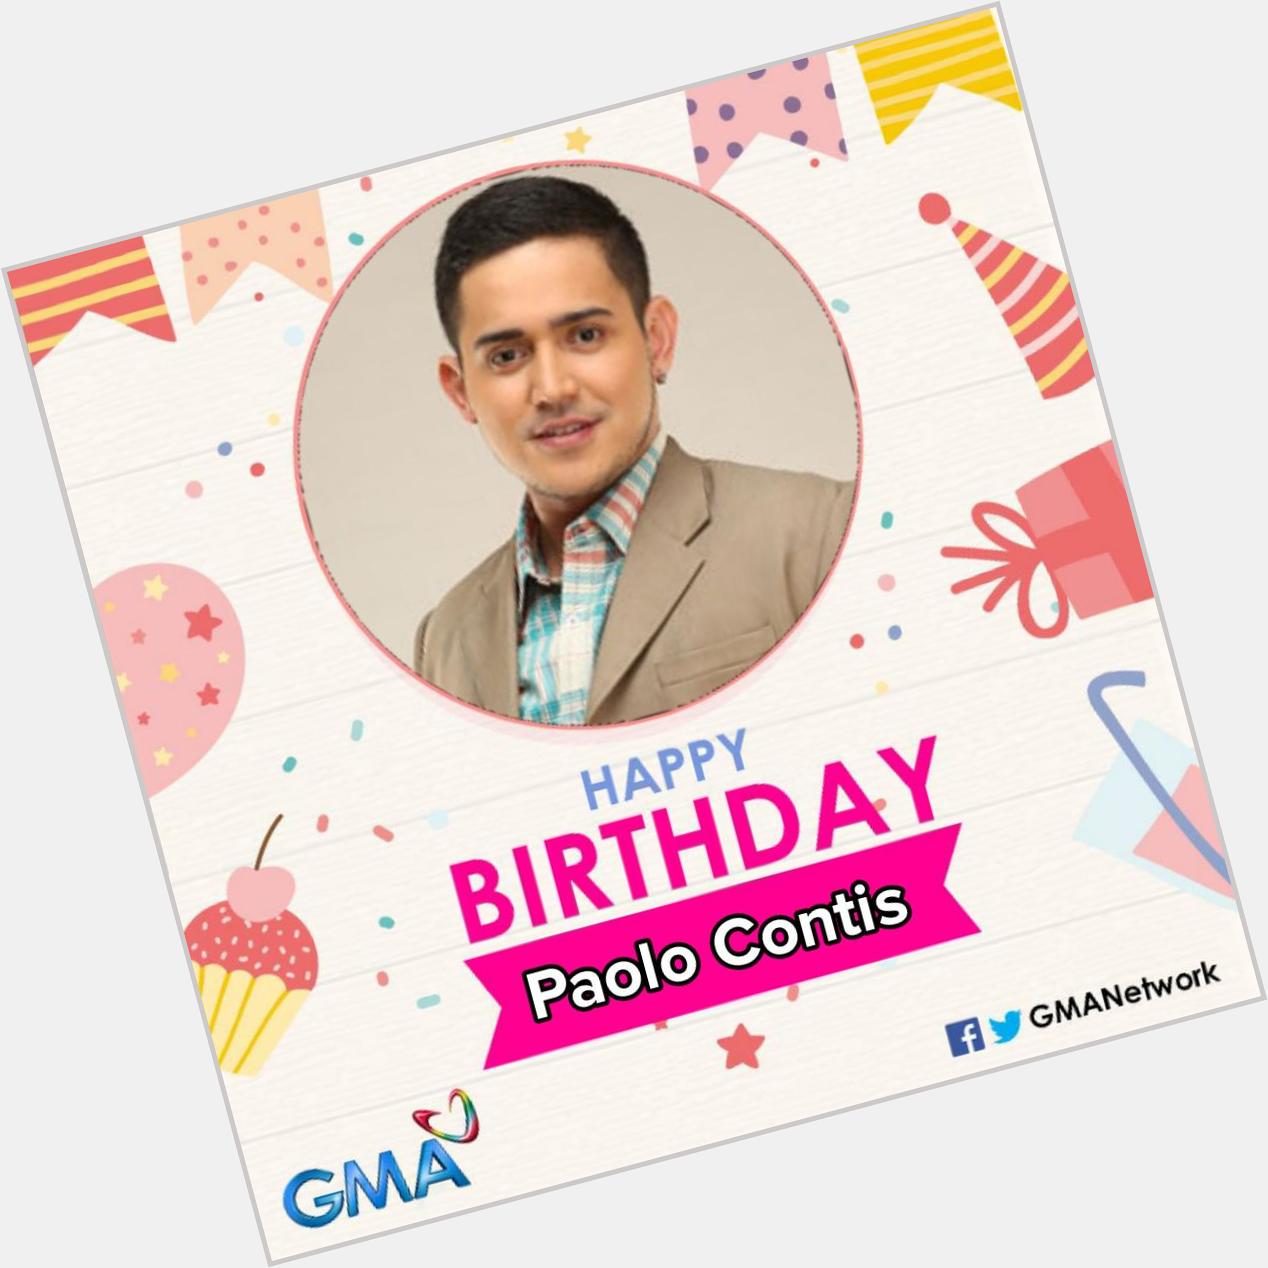 Mga Kapuso, join us in wishing PAOLO CONTIS a HAPPY 34th BIRTHDAY! 